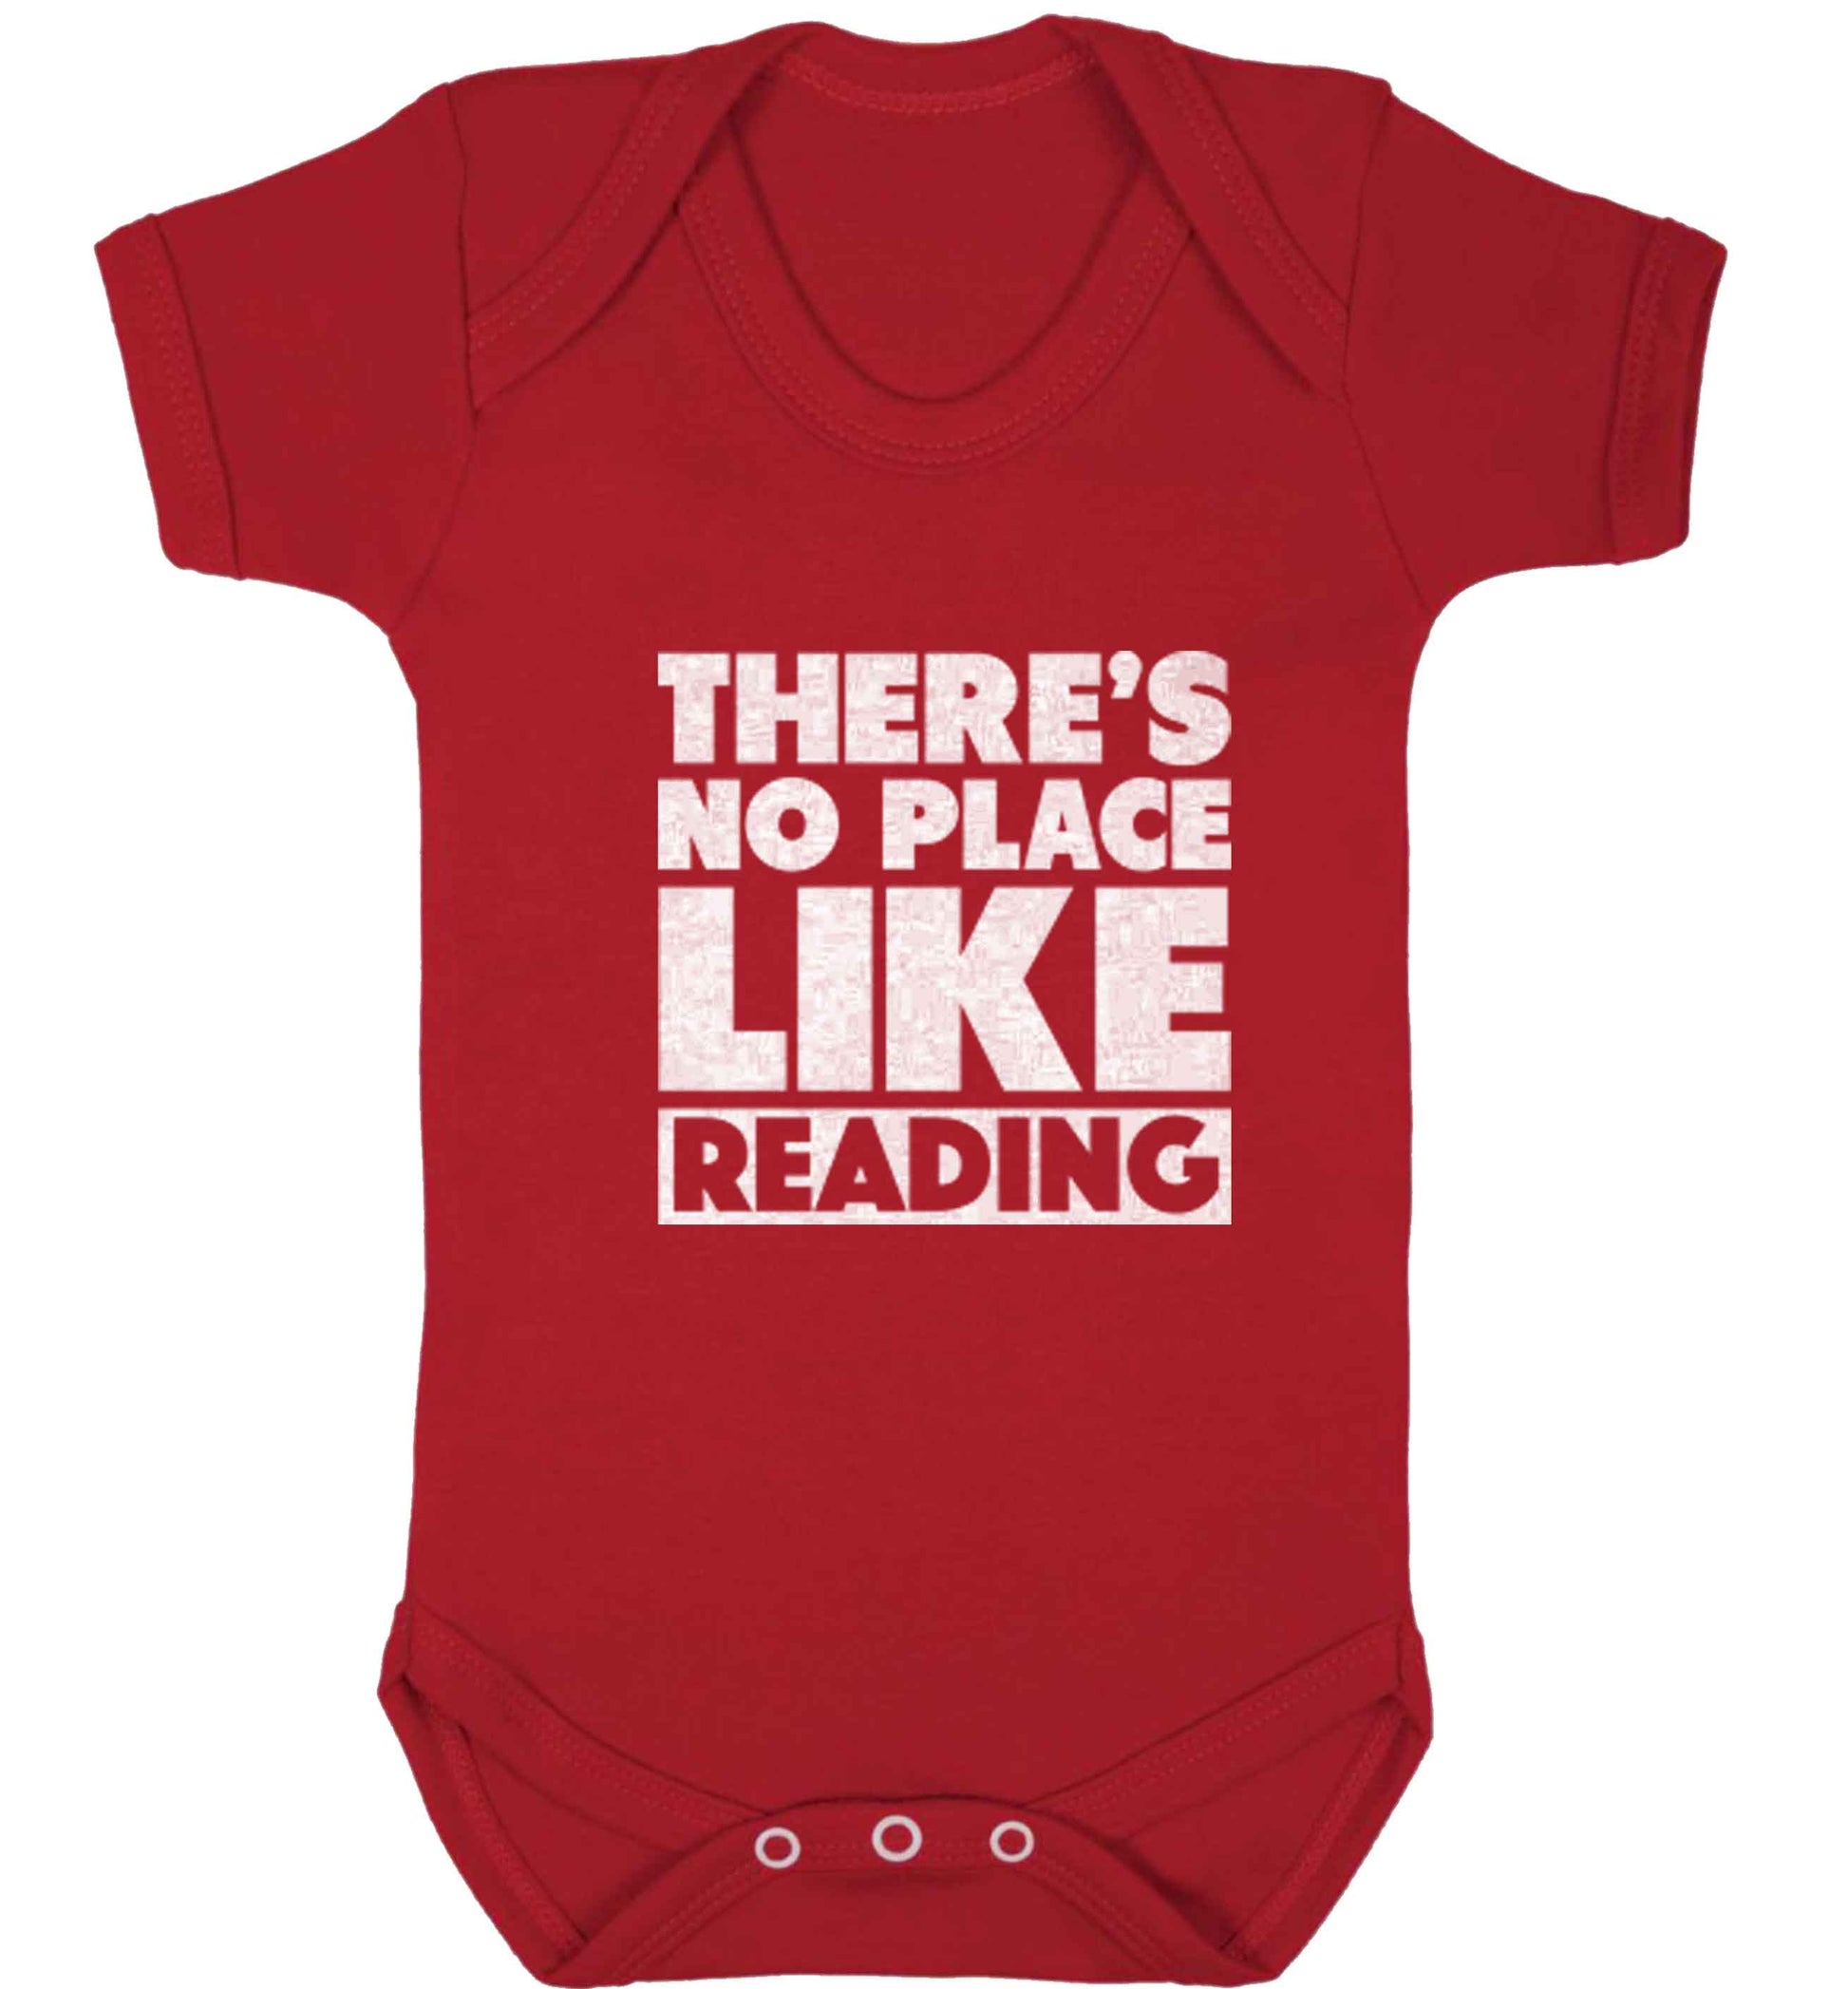 There's no place like Readingbaby vest red 18-24 months